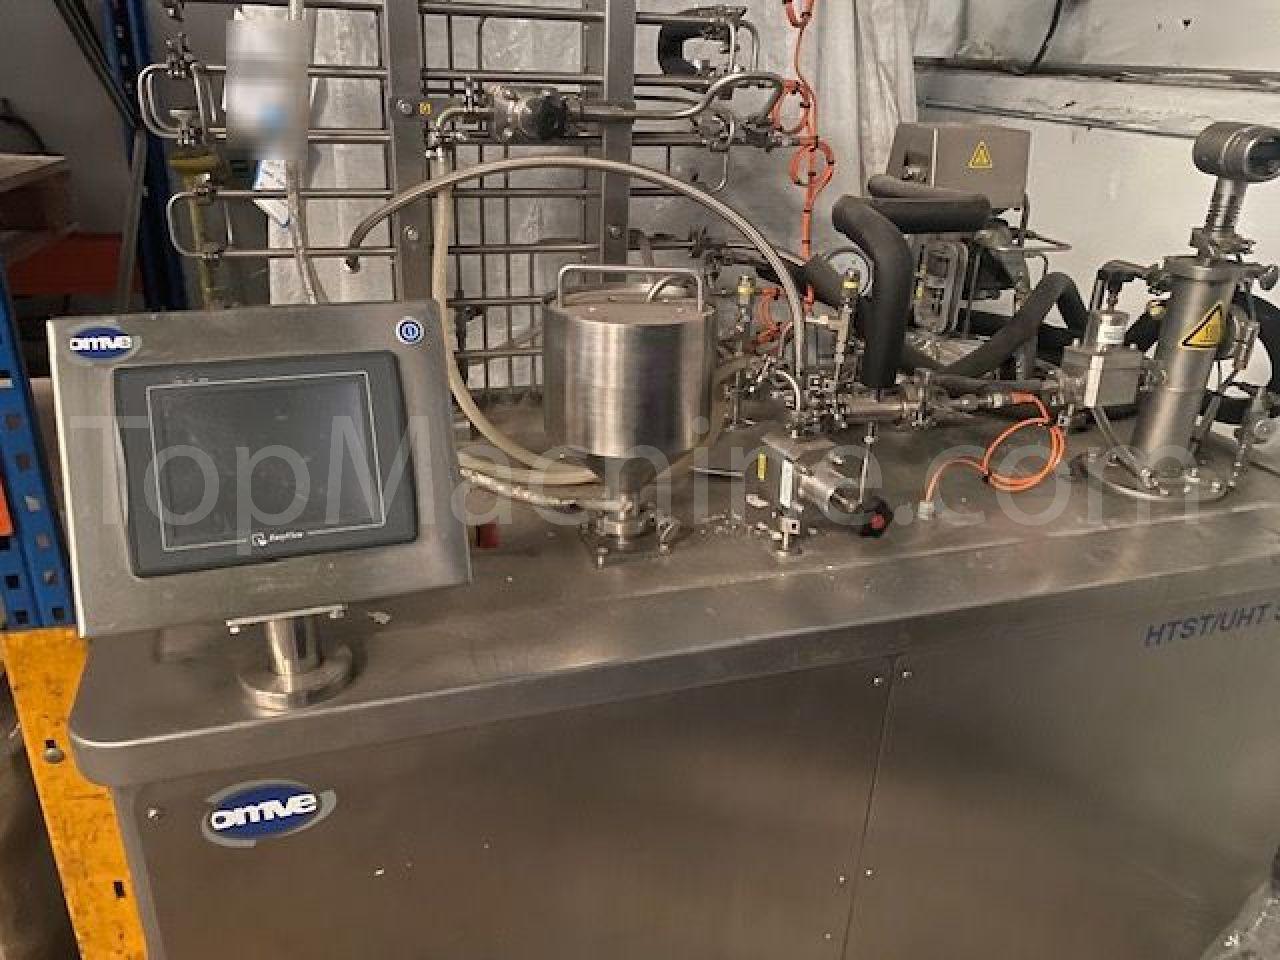 Used Omve HTST/UHT System HT220-DSI Dairy & Juices Pasteurizer